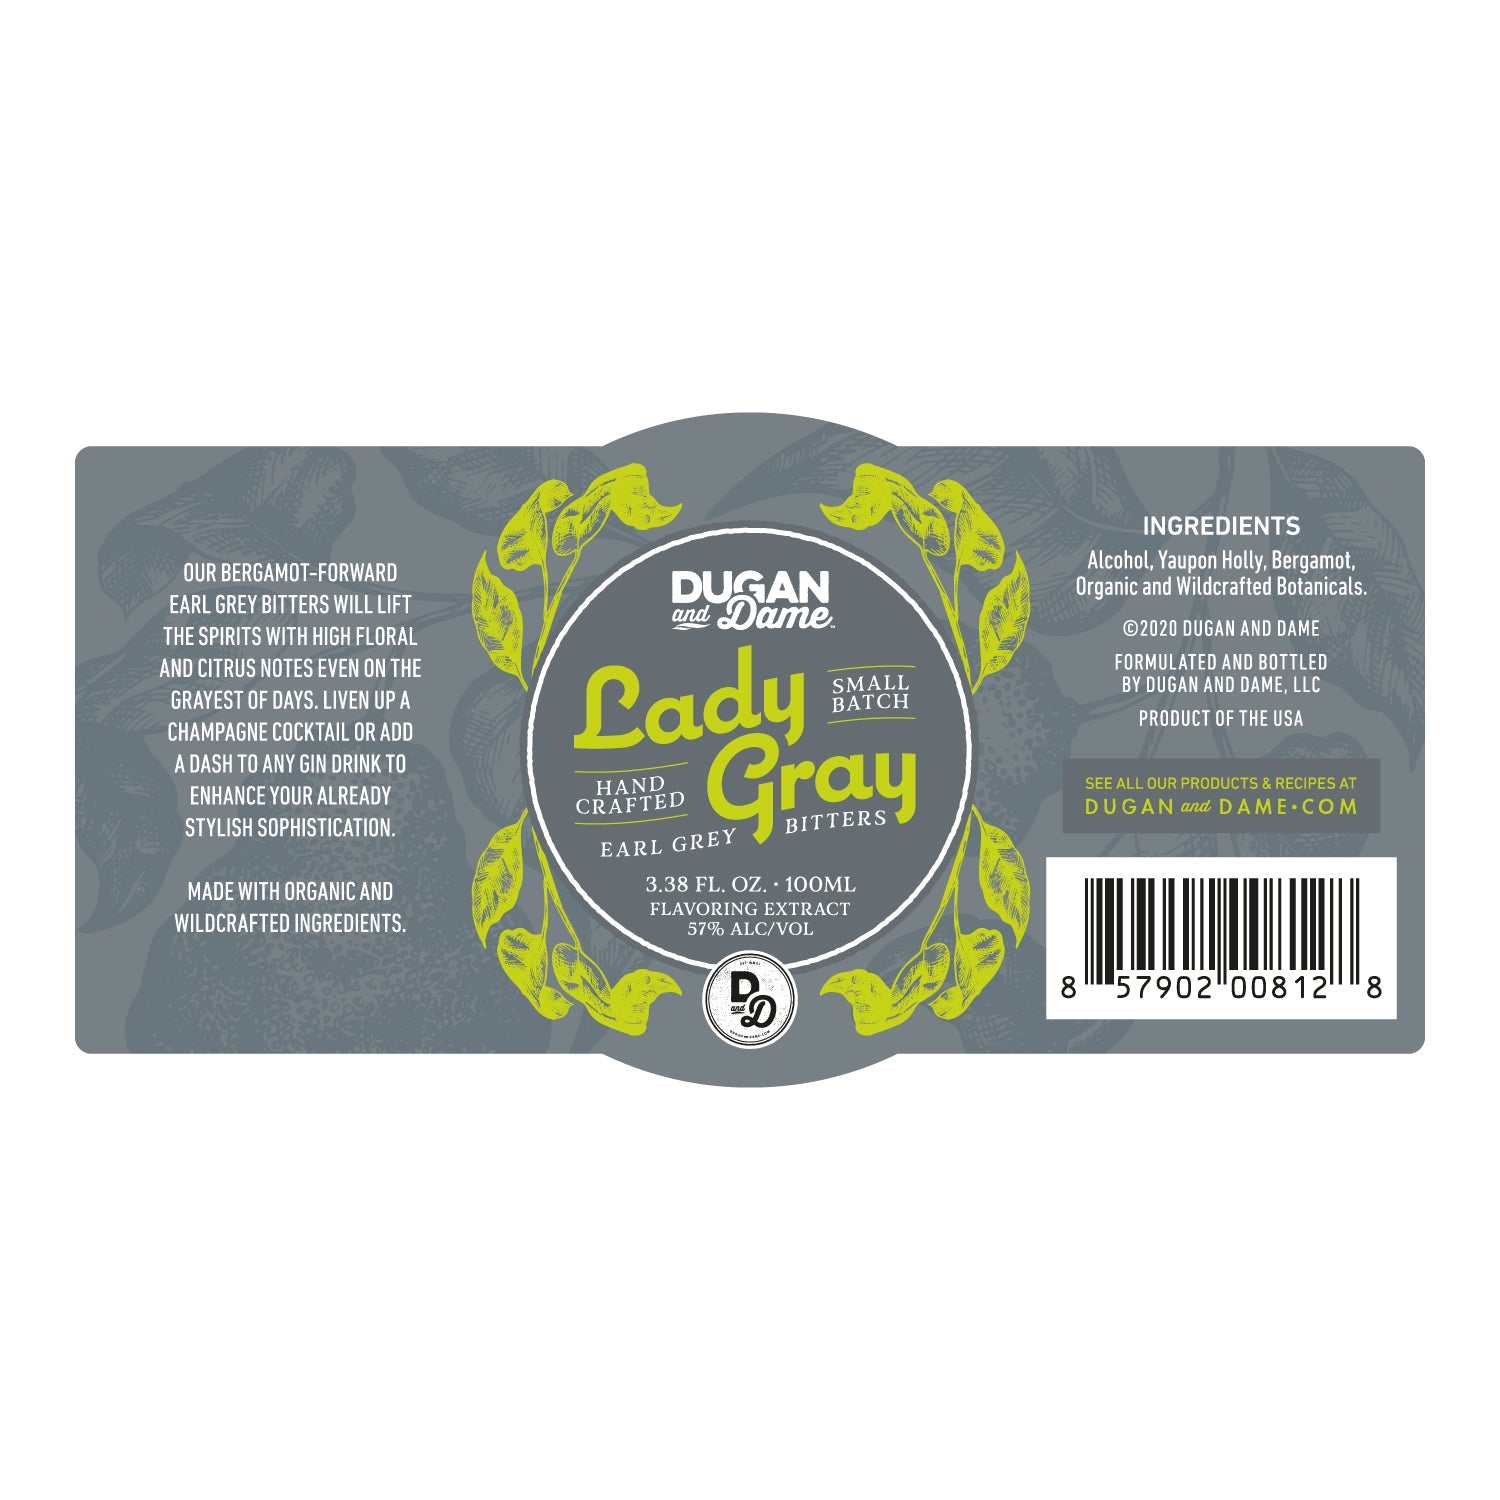 Dugan and Dame Lady Gray Cocktail Bitters Label